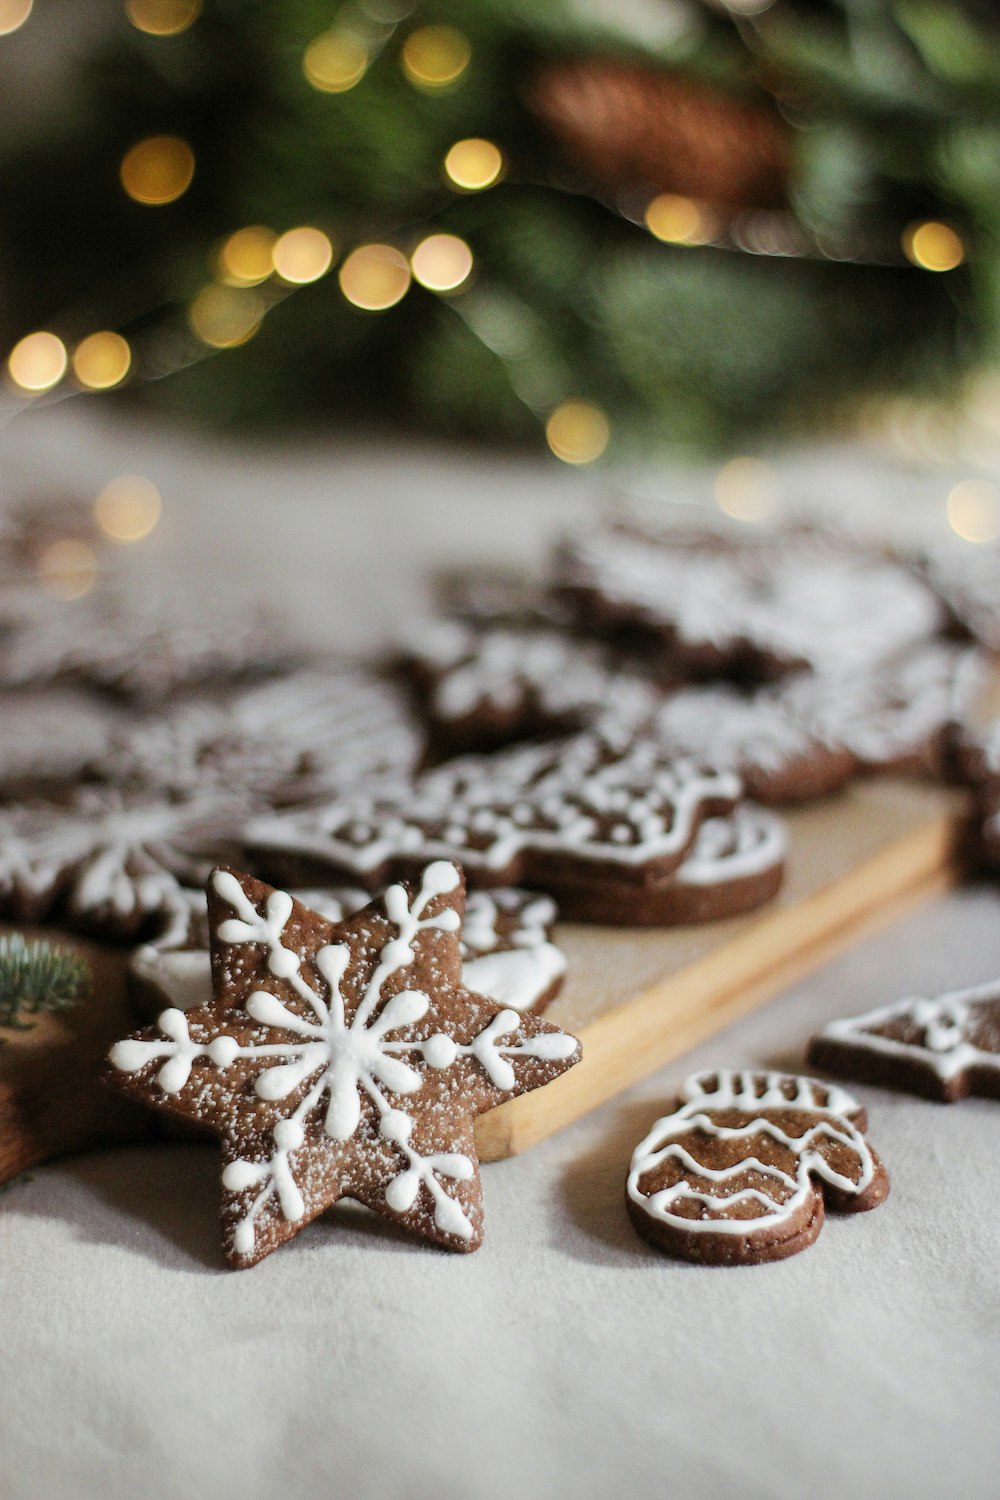 a close up of a tray of cookies near a christmas tree